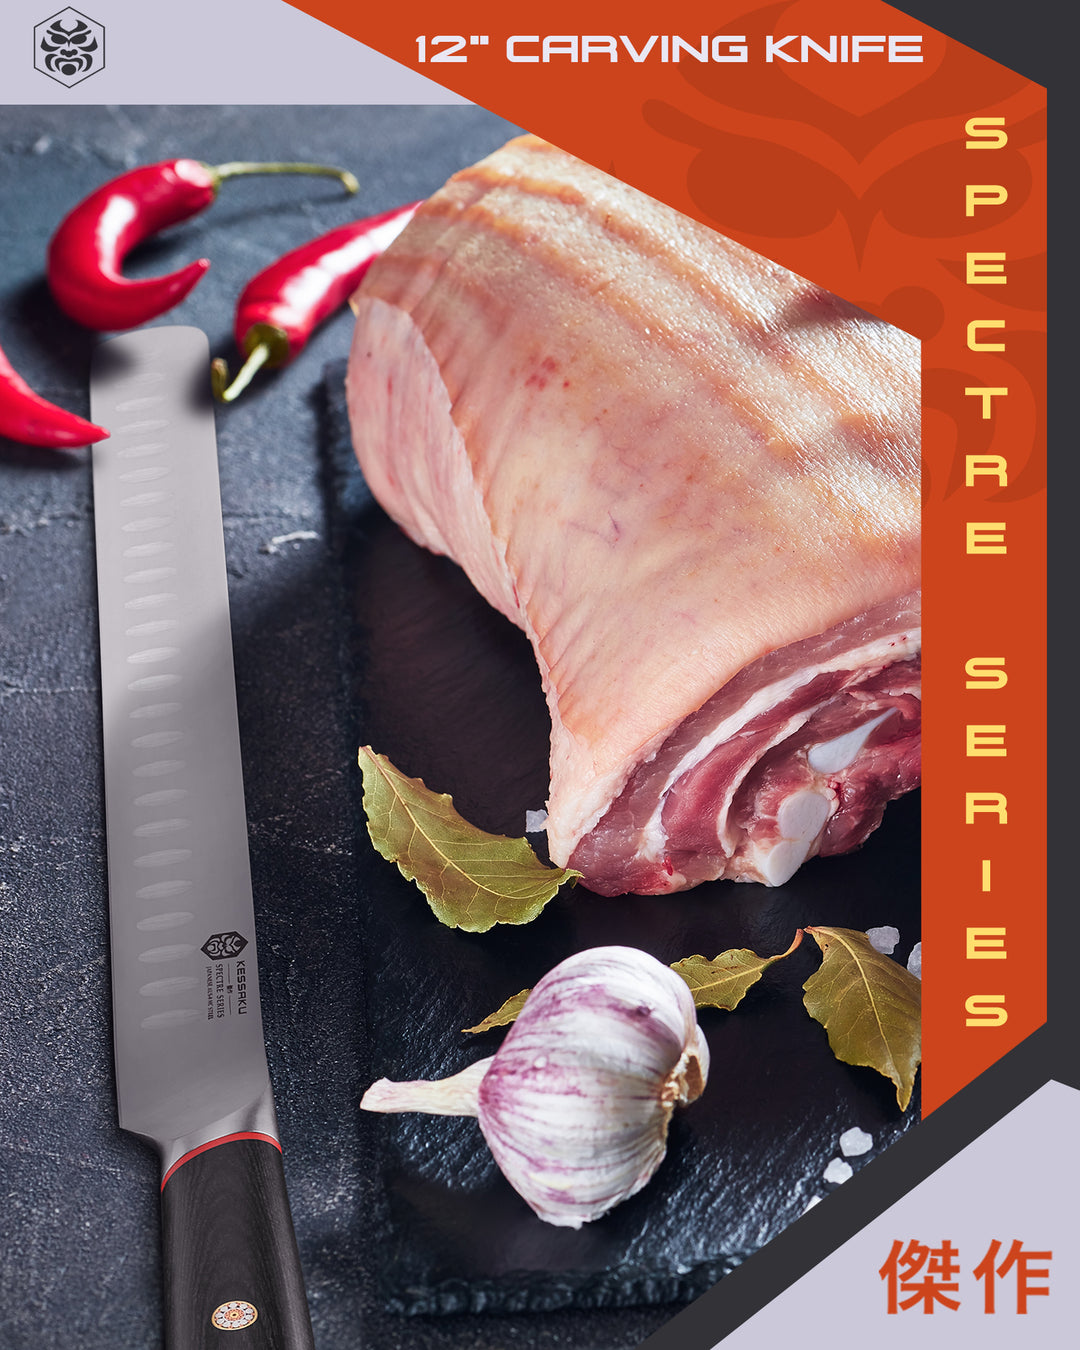 A large cut of ham, chili peppers, garlic, and salt with the Spectre Carving Knife